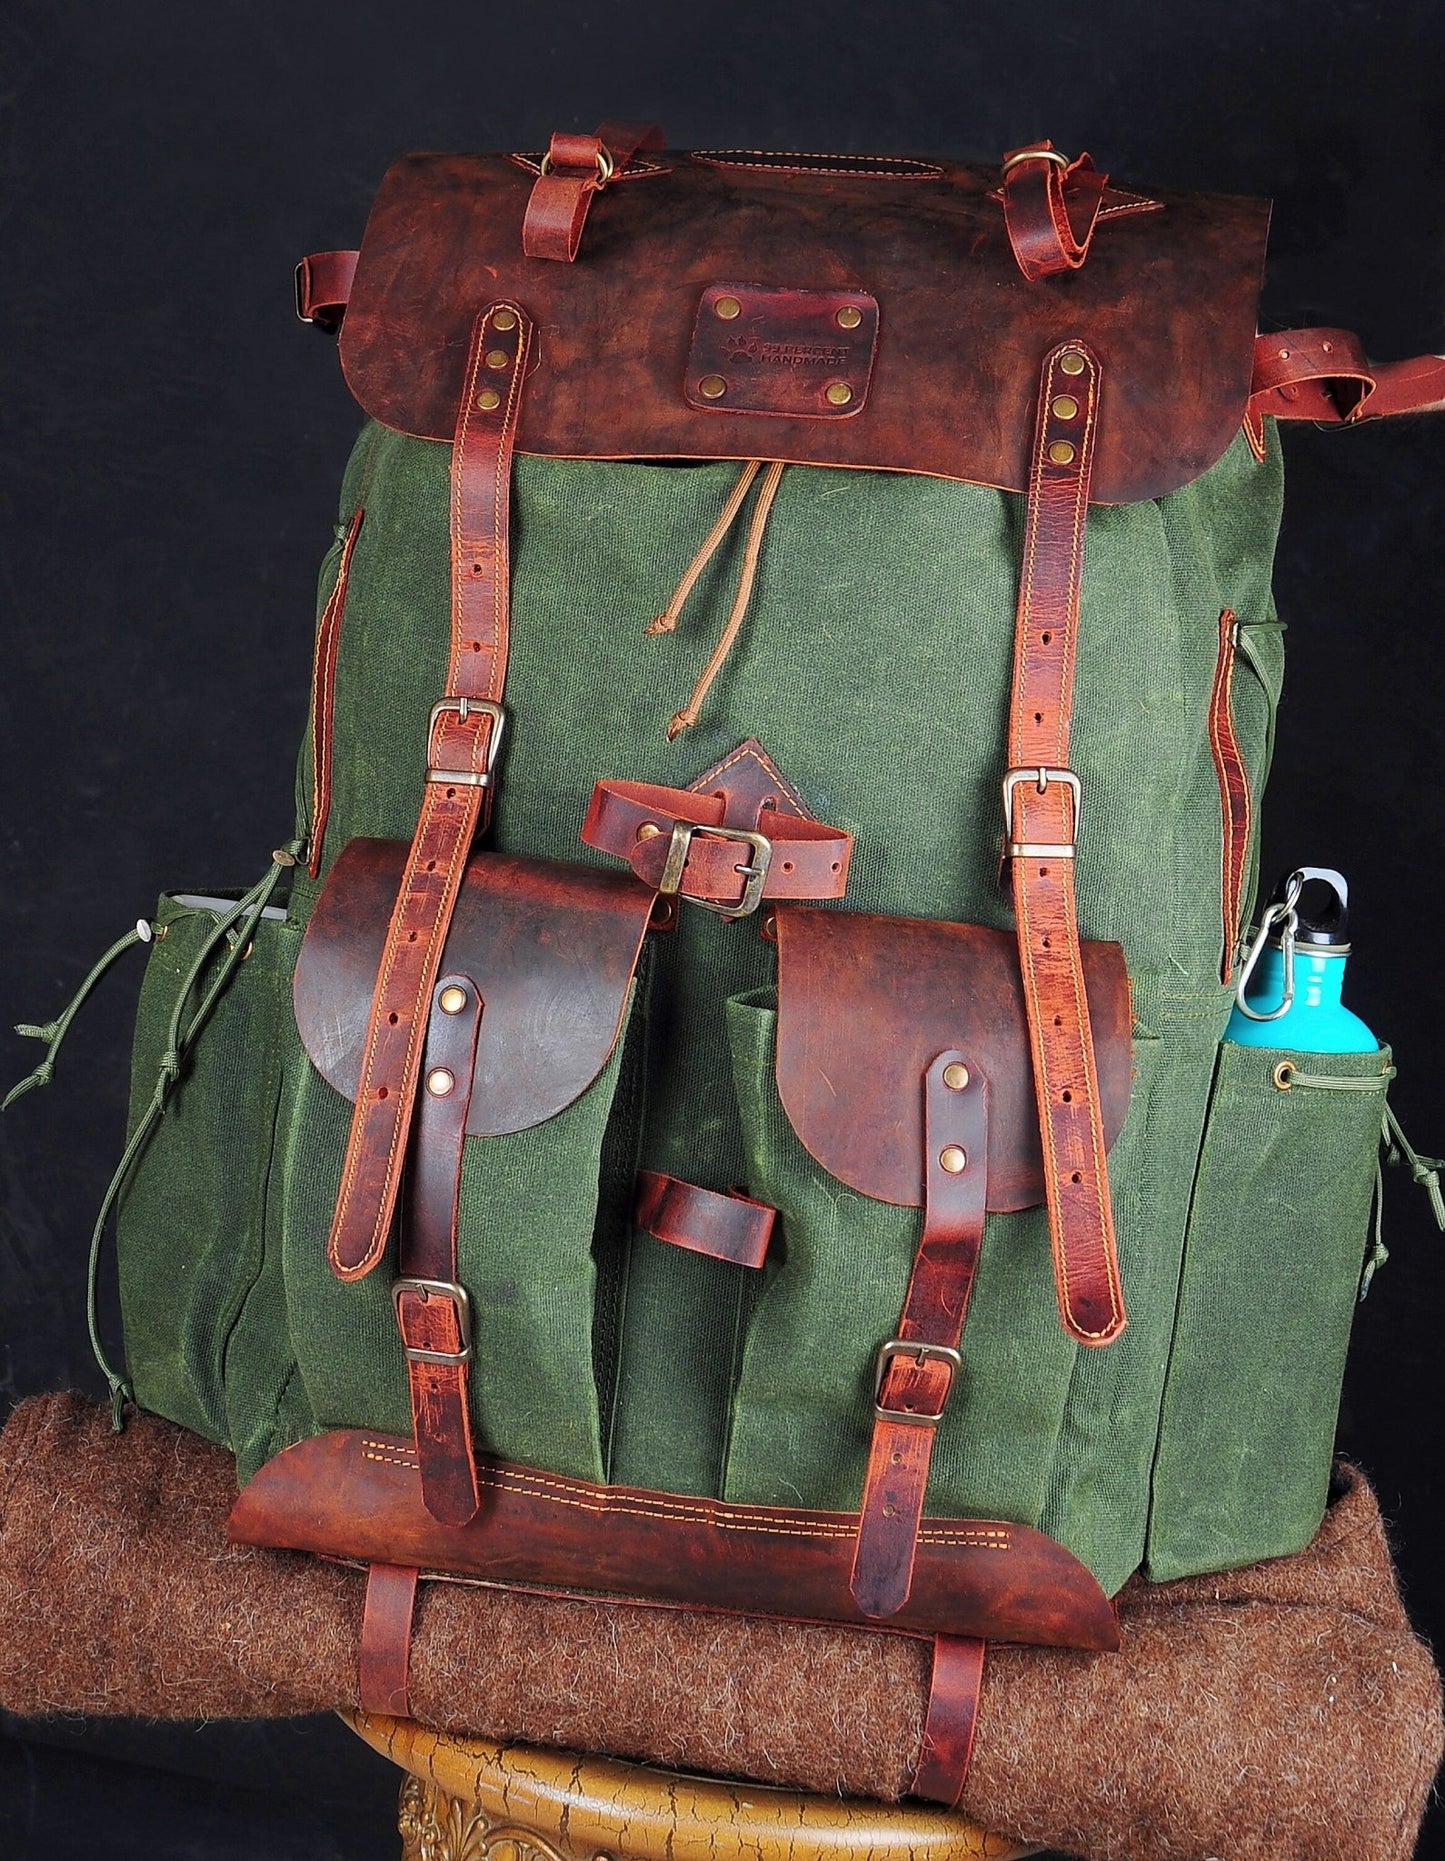 Green Bestseller | Leather Backpack | Waxed Canvas Bag | Travel | Bushcraft | Camping | Green, Brown Options | 50 Liters | Personalization  99percenthandmade   